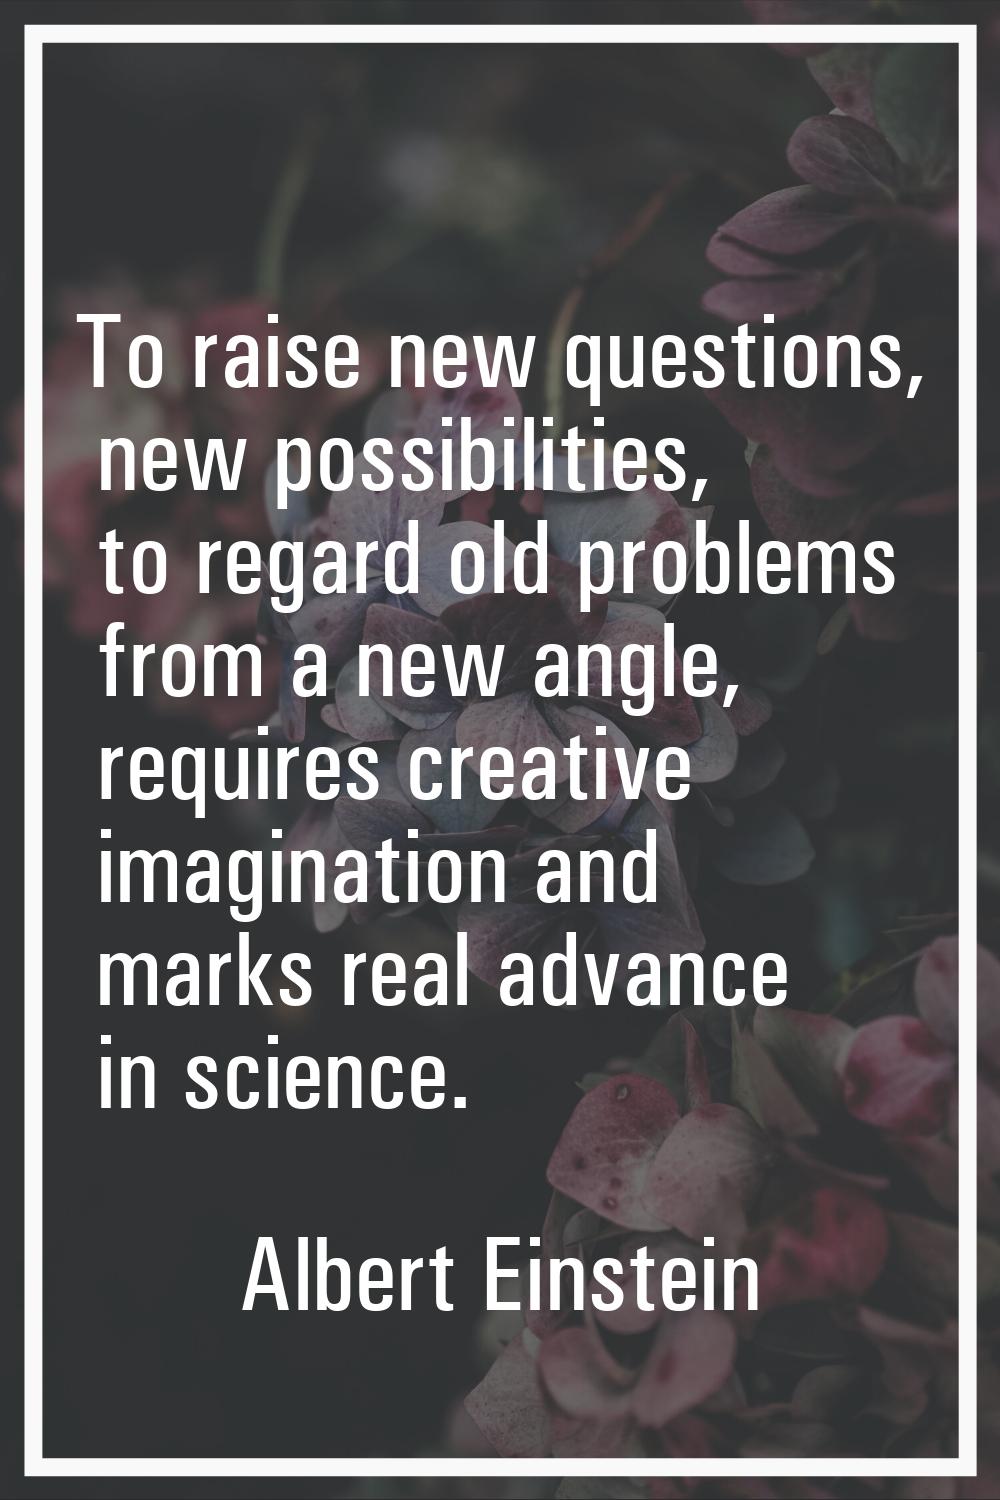 To raise new questions, new possibilities, to regard old problems from a new angle, requires creati